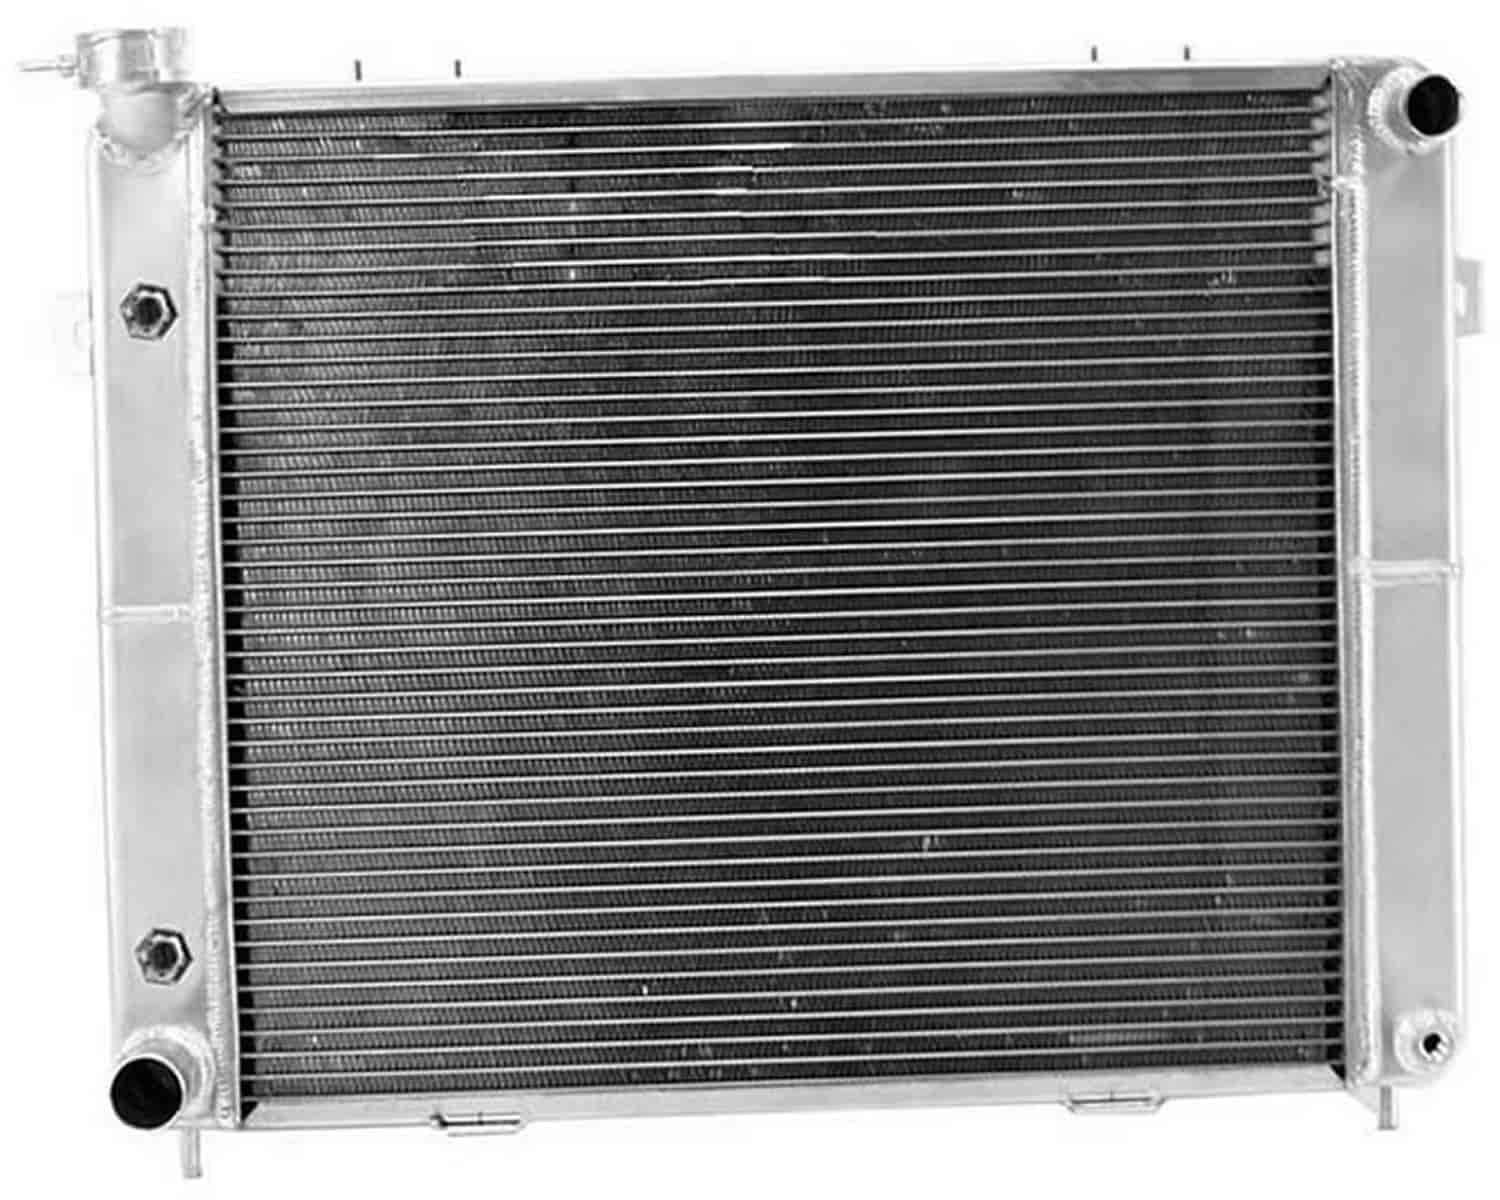 PerformanceFit Radiator for 1993-1998 Jeep Cherokee Grand Cherokee L6 with Transmission Cooler